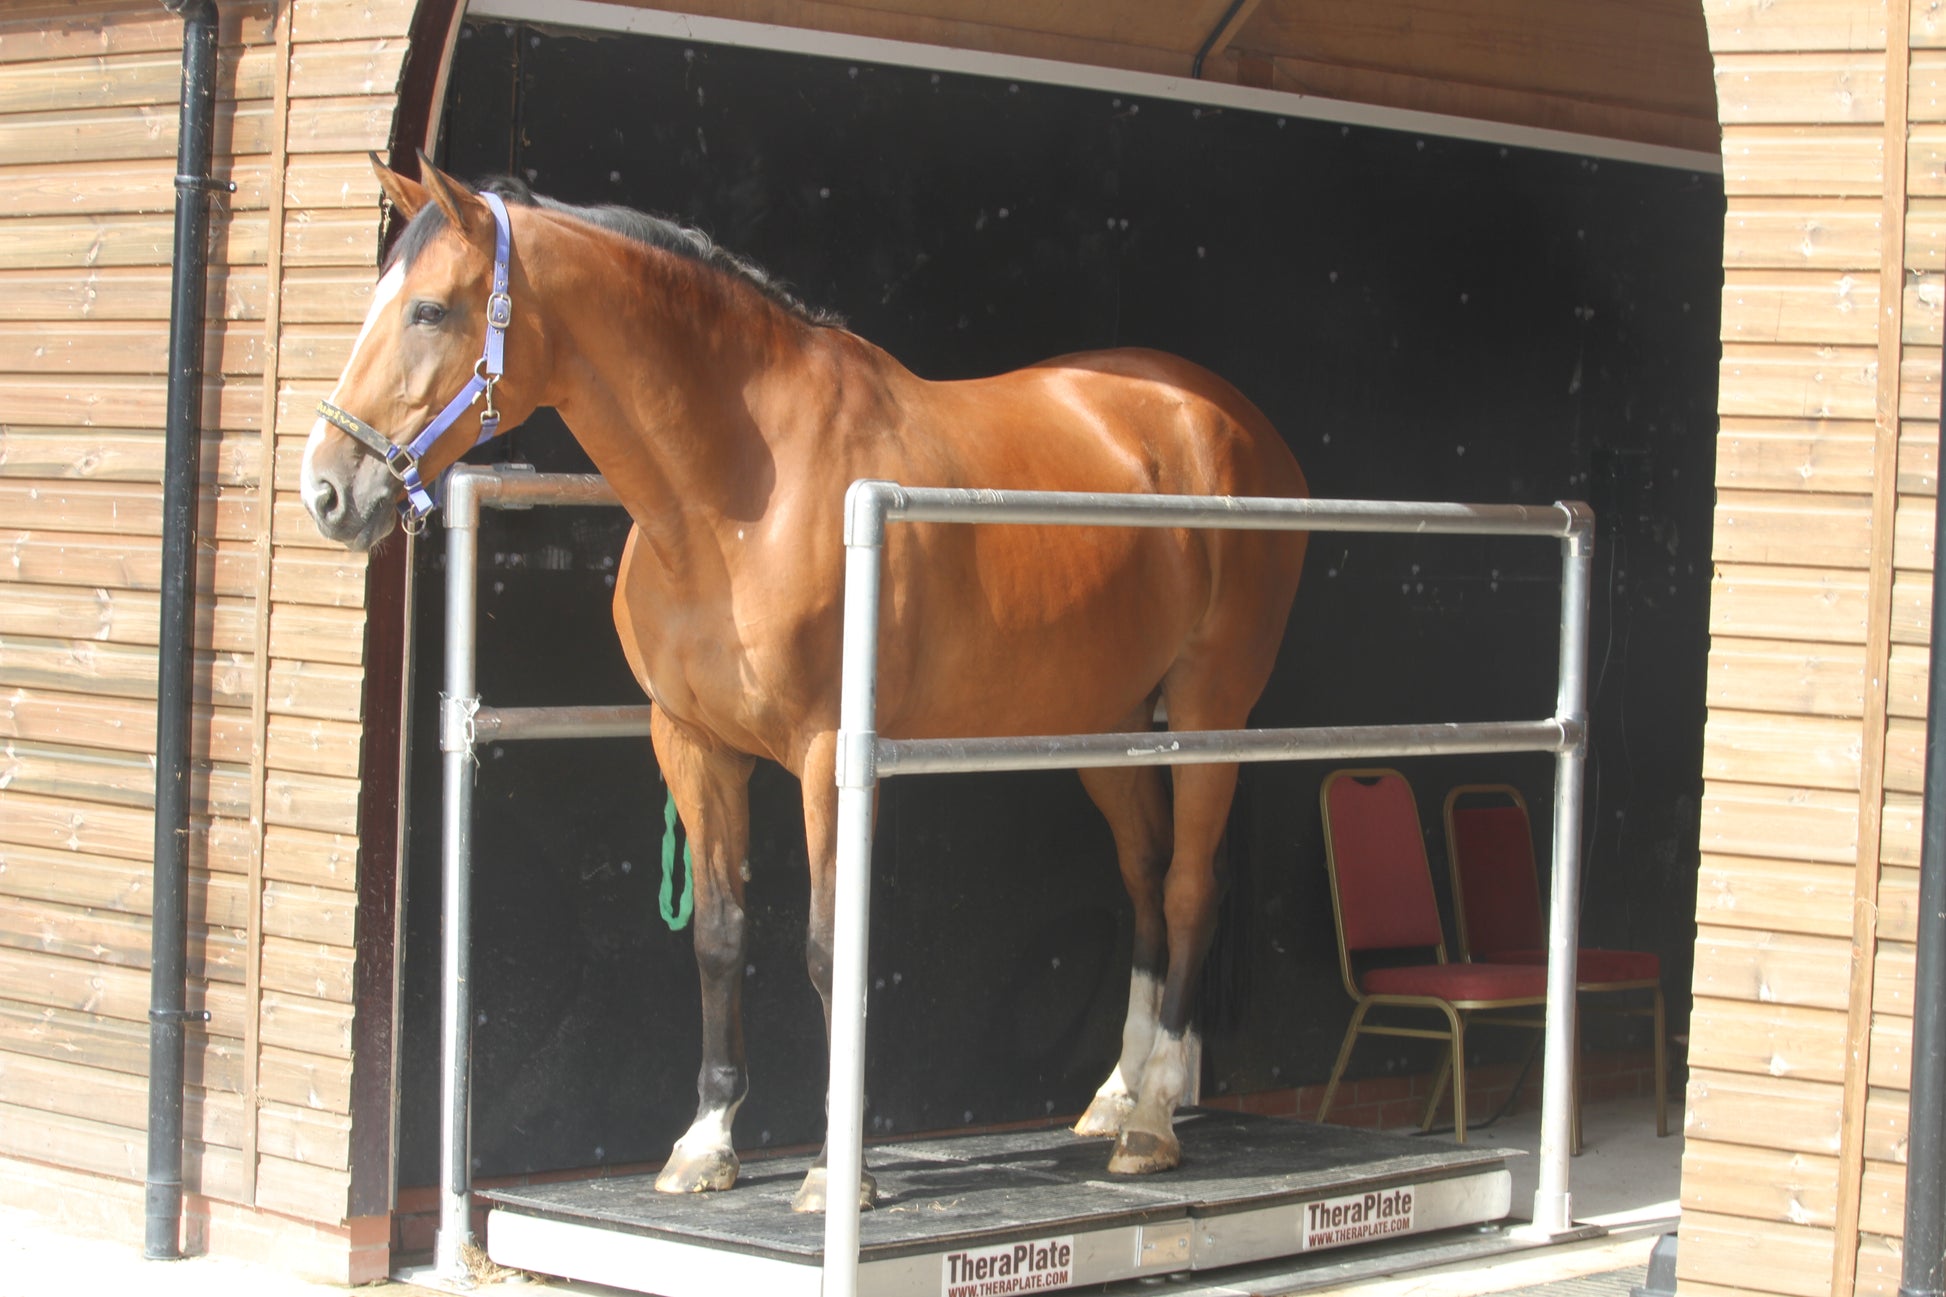 Thera Plate - For prevention and acceleration in the healing of injuries. wave vortex therapy produces involuntary muscle contractions to increase blood flow throughout the body. Rookery Equine offers rental services on the Thera Plate,. therefore can be used for a number of horses on your yard